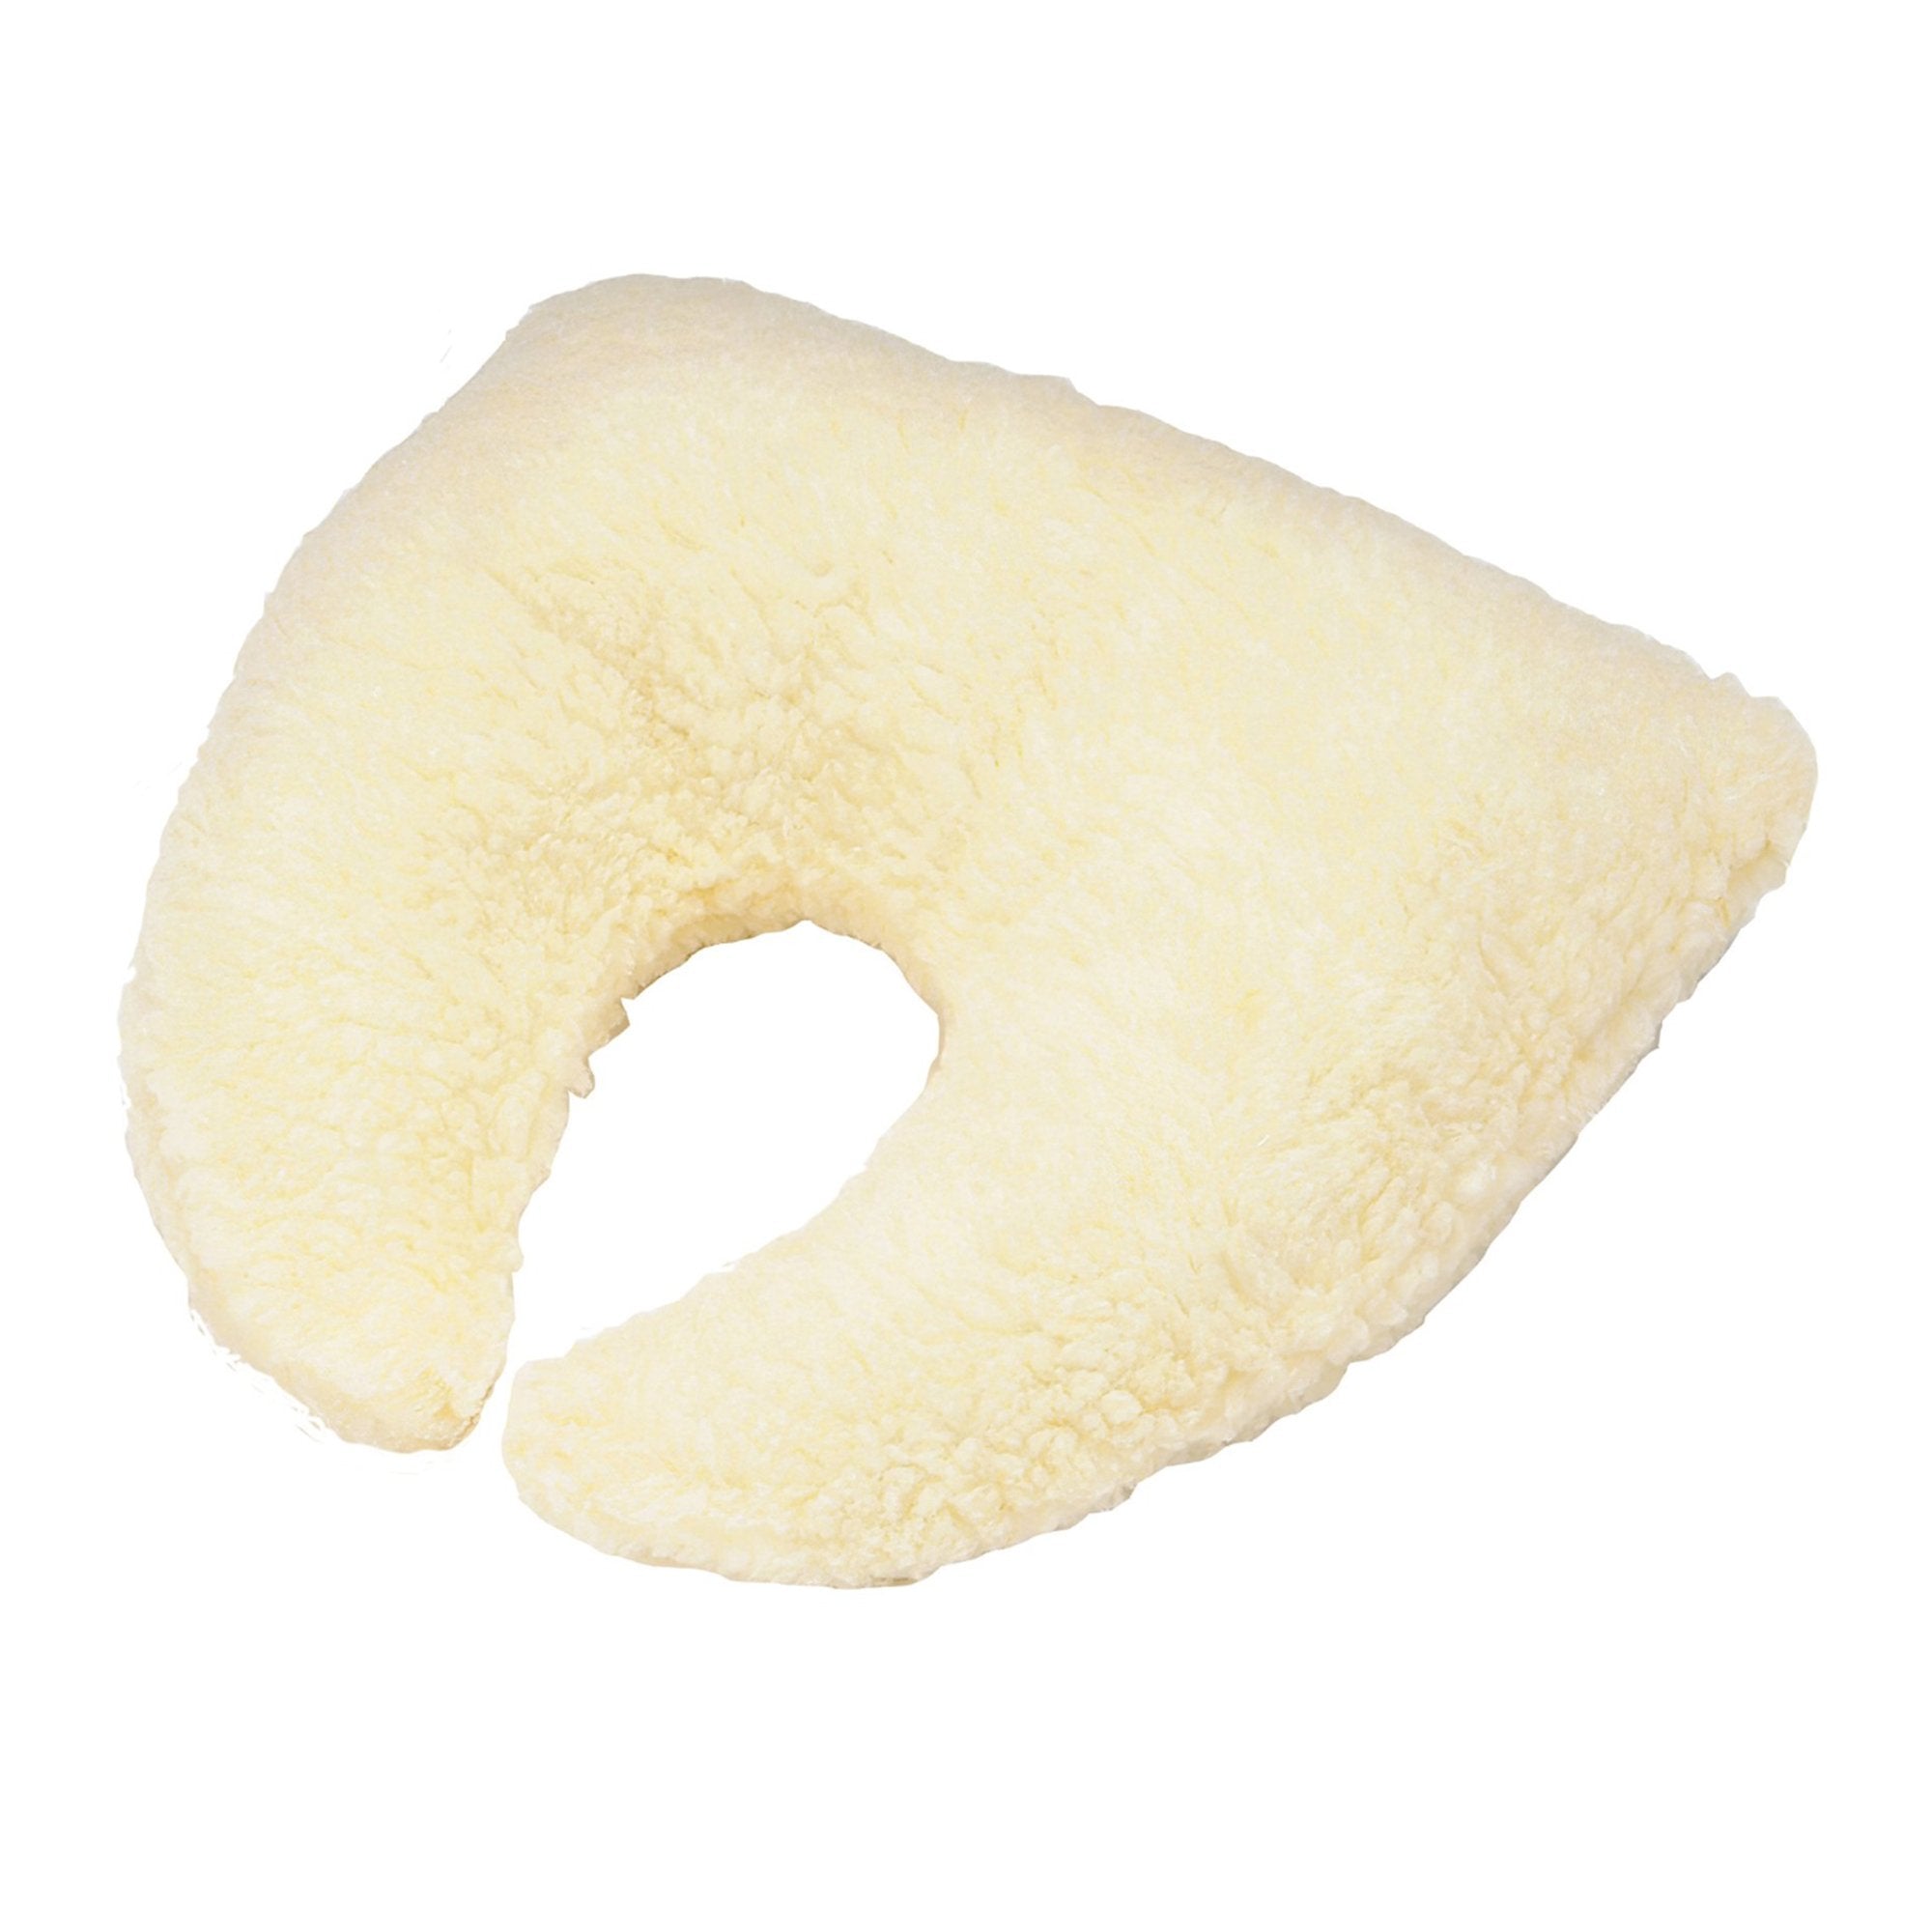 Neck Support Pillow 13 Inch Depth Polyester Fiber Hook and Loop Strap Fastening